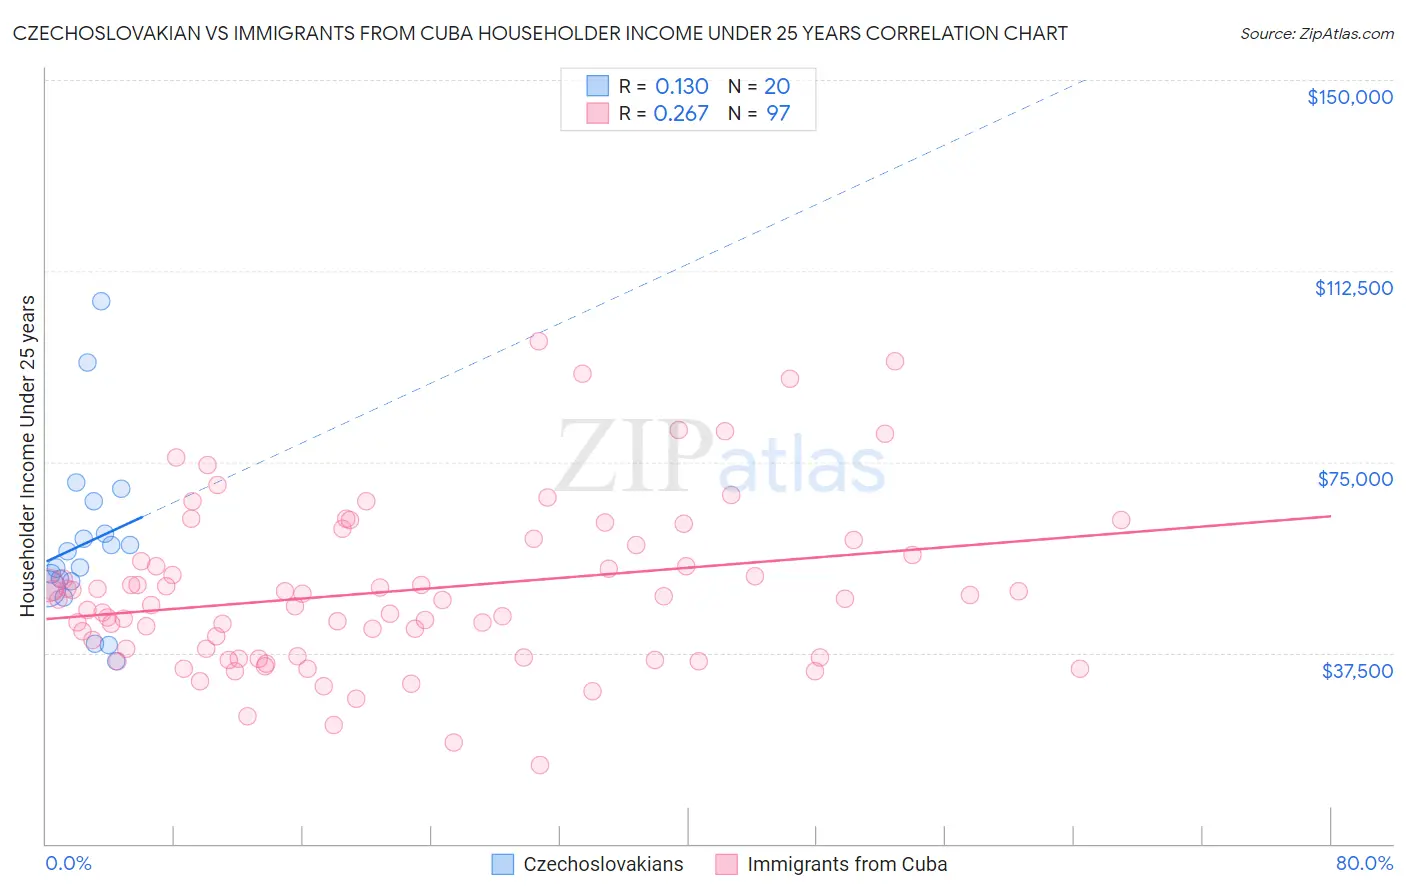 Czechoslovakian vs Immigrants from Cuba Householder Income Under 25 years